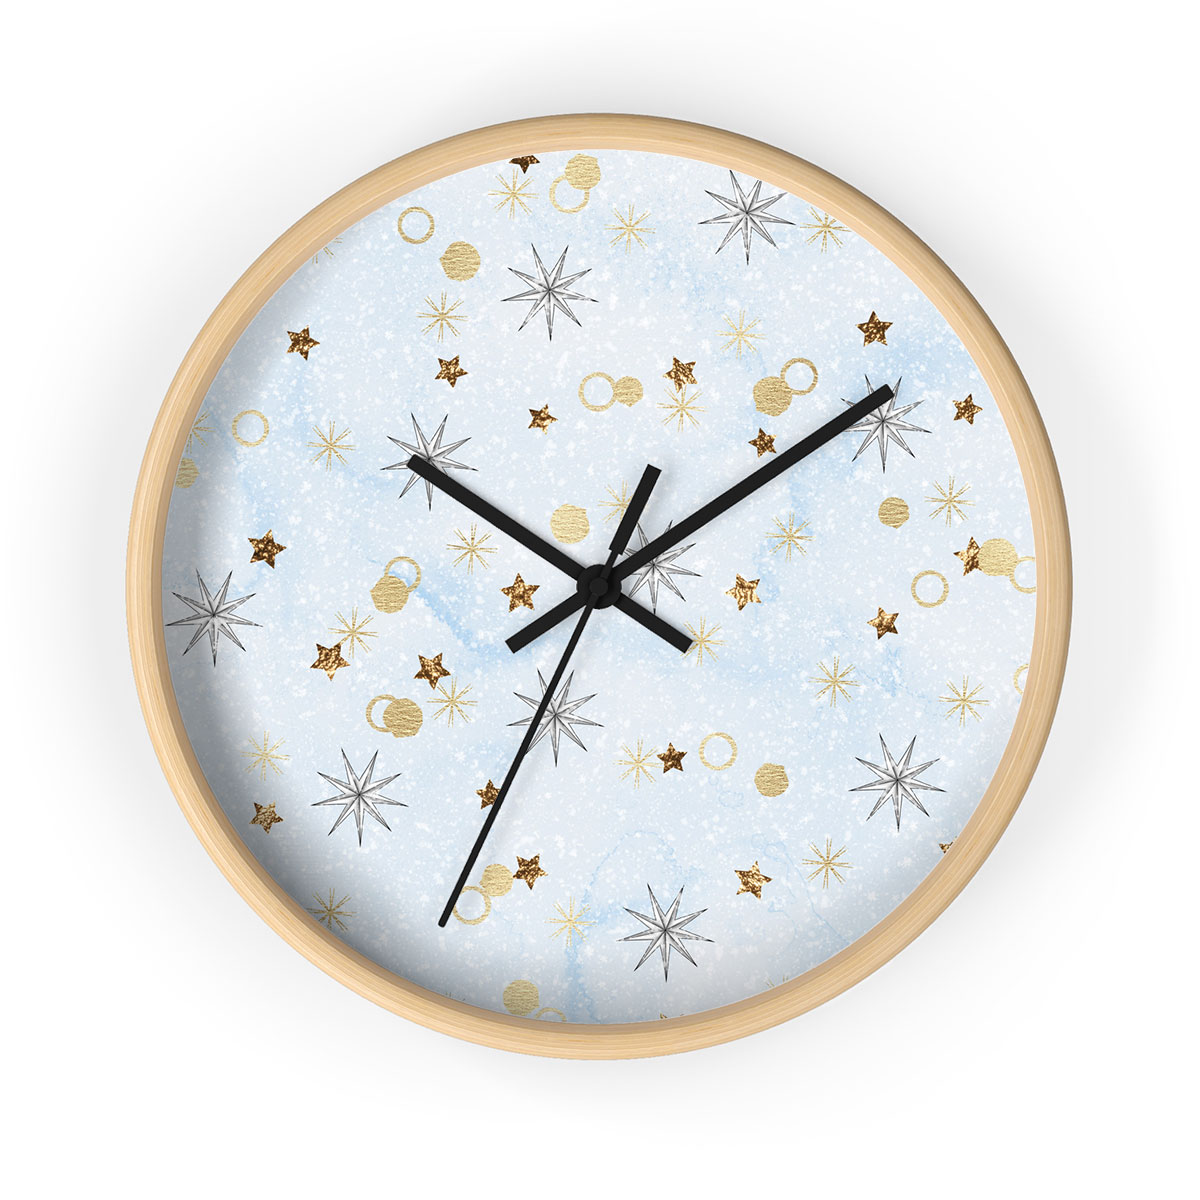 Gold Christmas Star On Snowflake Background Printed Wooden Wall Clock